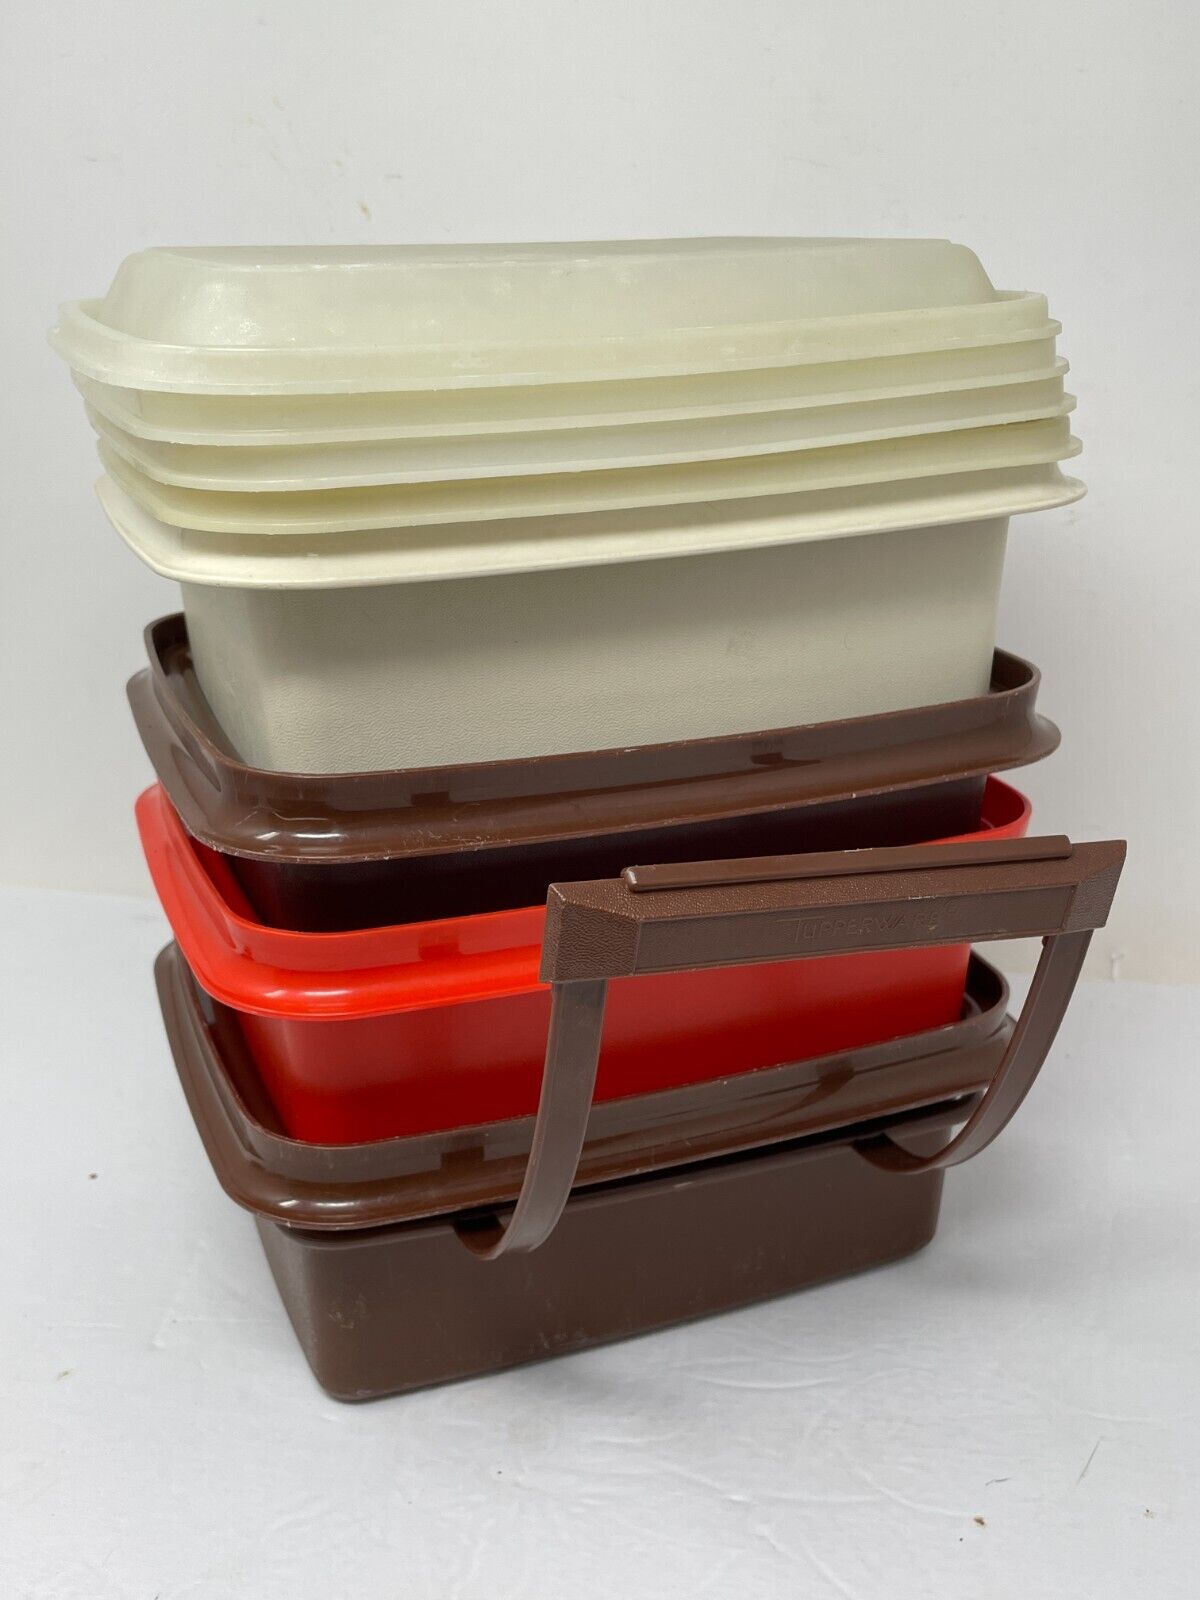 9 Piece Set of Tupperware Pack -n- Carry Lunch Boxes Orange Brown White